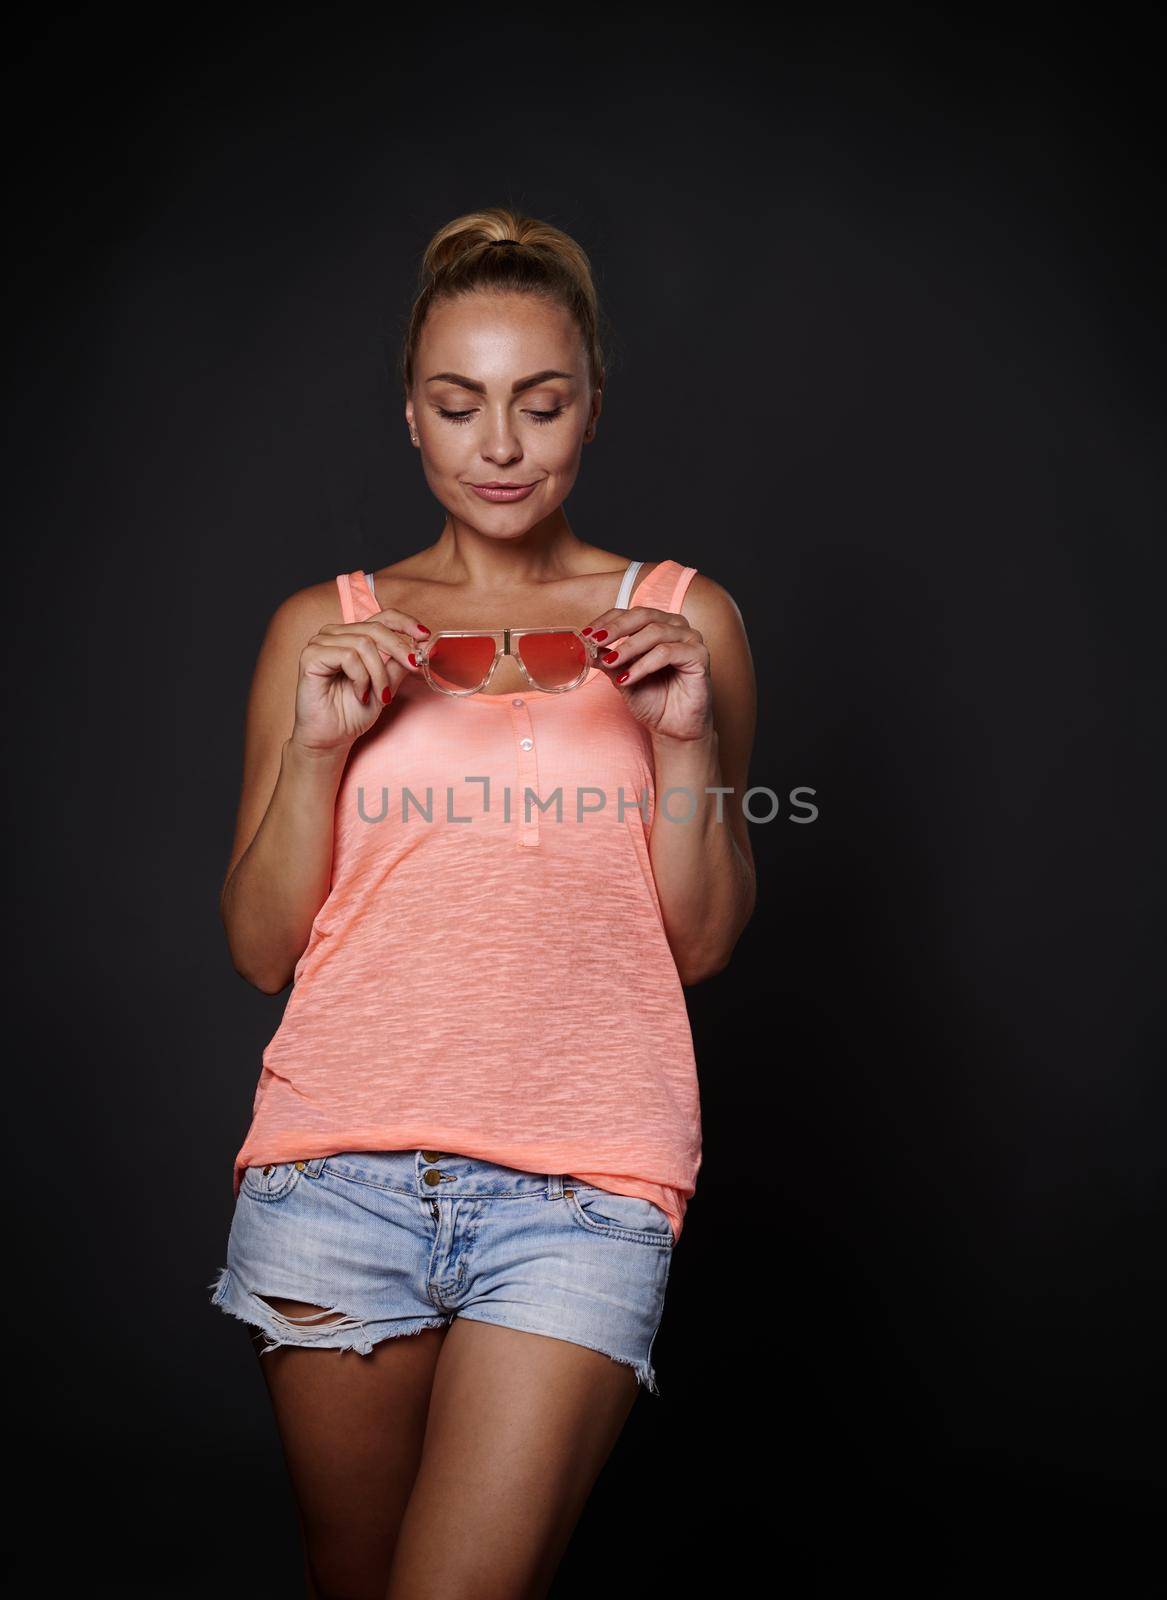 Charming sexy young blonde European pretty woman with tanned skin, aesthetic fit body in denim shorts, pink top holding sunglasses and smiling posing over black background with copy ad space by artgf